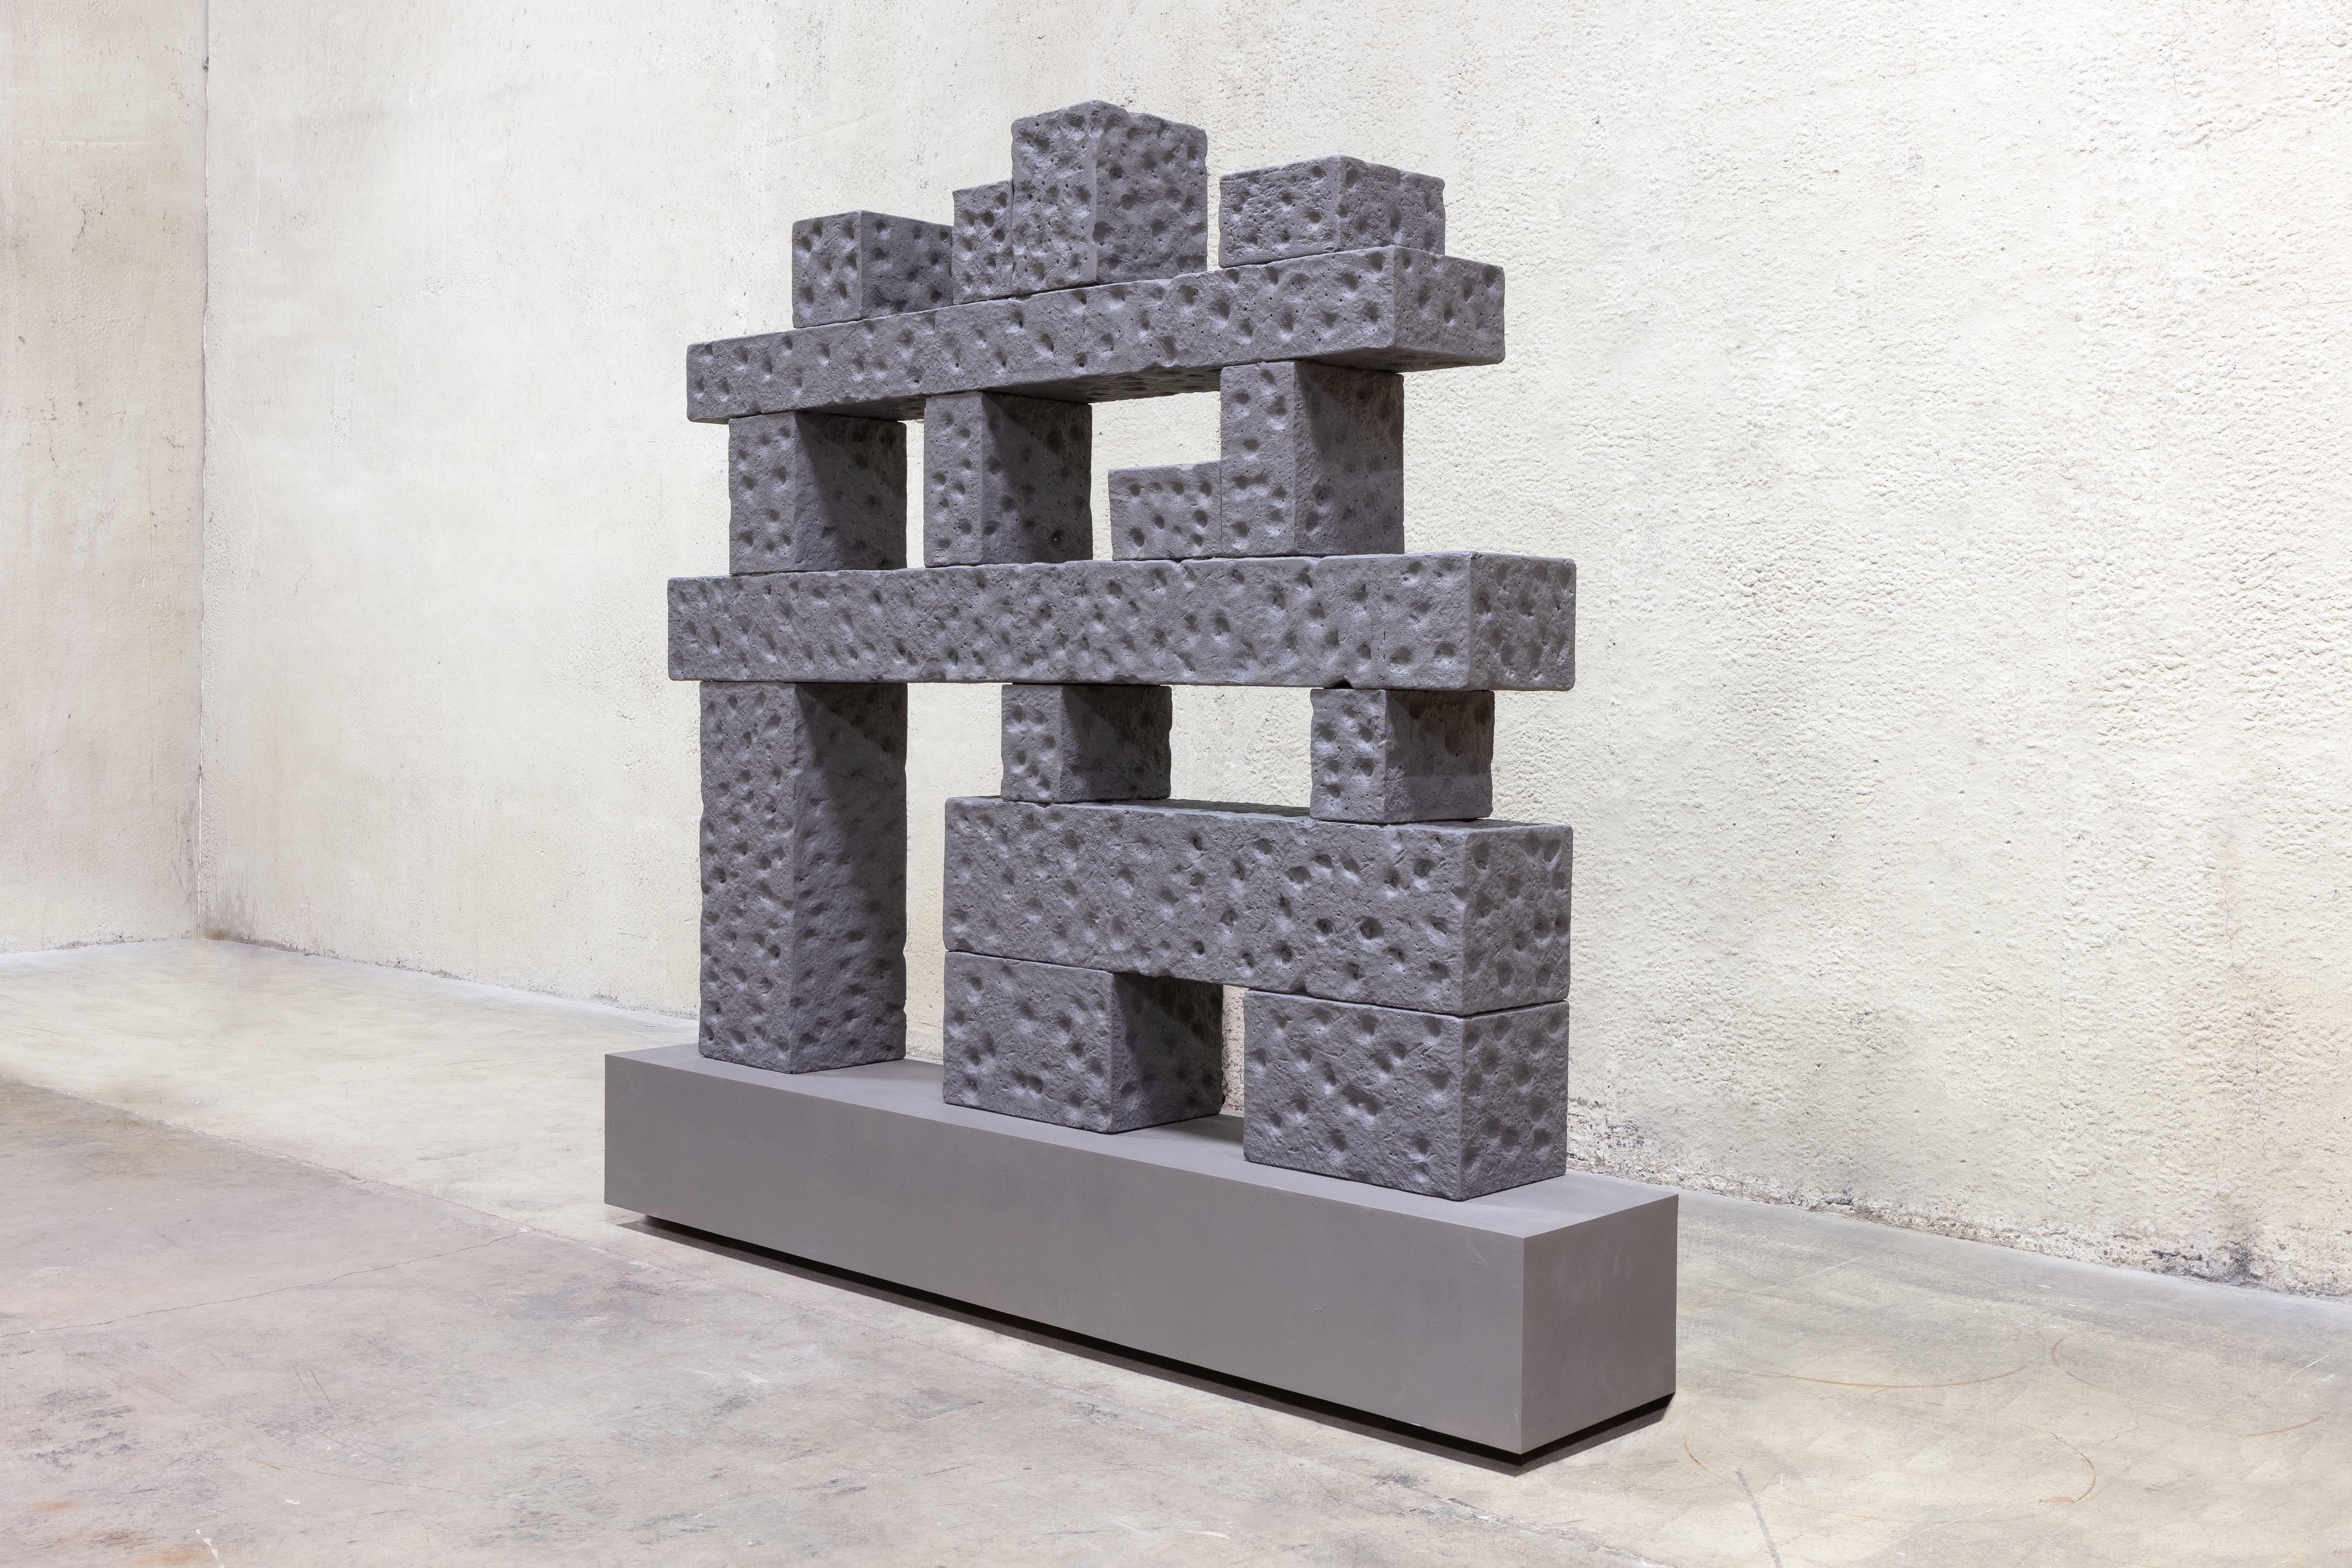 Andrea Branzi [Italian, b. 1938]
Cromlech, 2019
Foam, concrete, aluminum
Measures: 79.5 x 87 x 15.75 inches
202 x 221 x 40 cm

Andrea Branzi was born in Florence in 1938 and studied as an architect at the Florence School of Architecture,